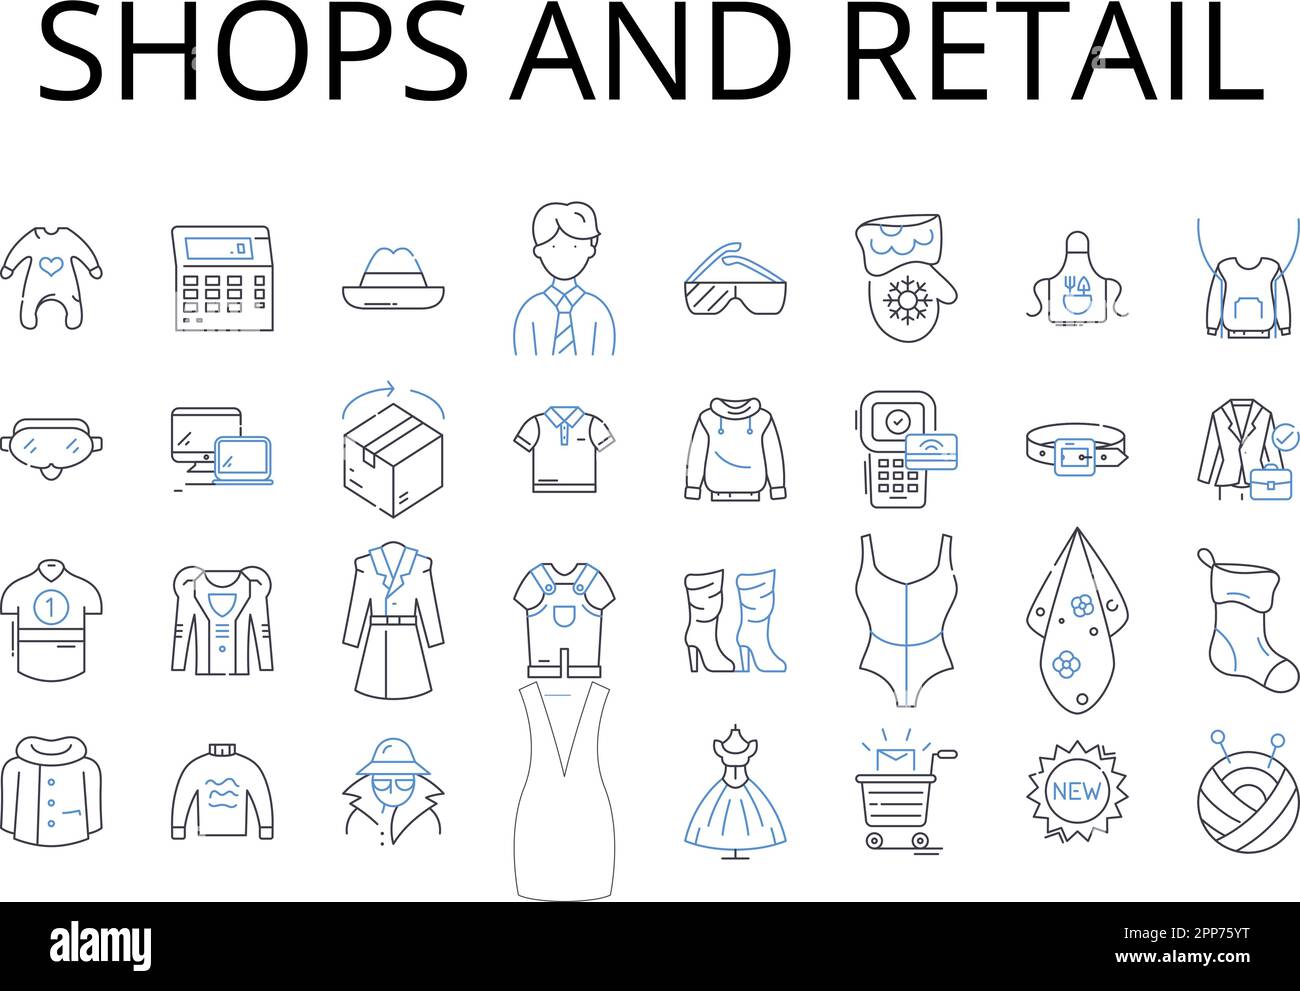 Shops and retail line icons collection. Boutiques, Stores, Markets, Outlets, Supermarkets, Malls, Department stores vector and linear illustration Stock Vector